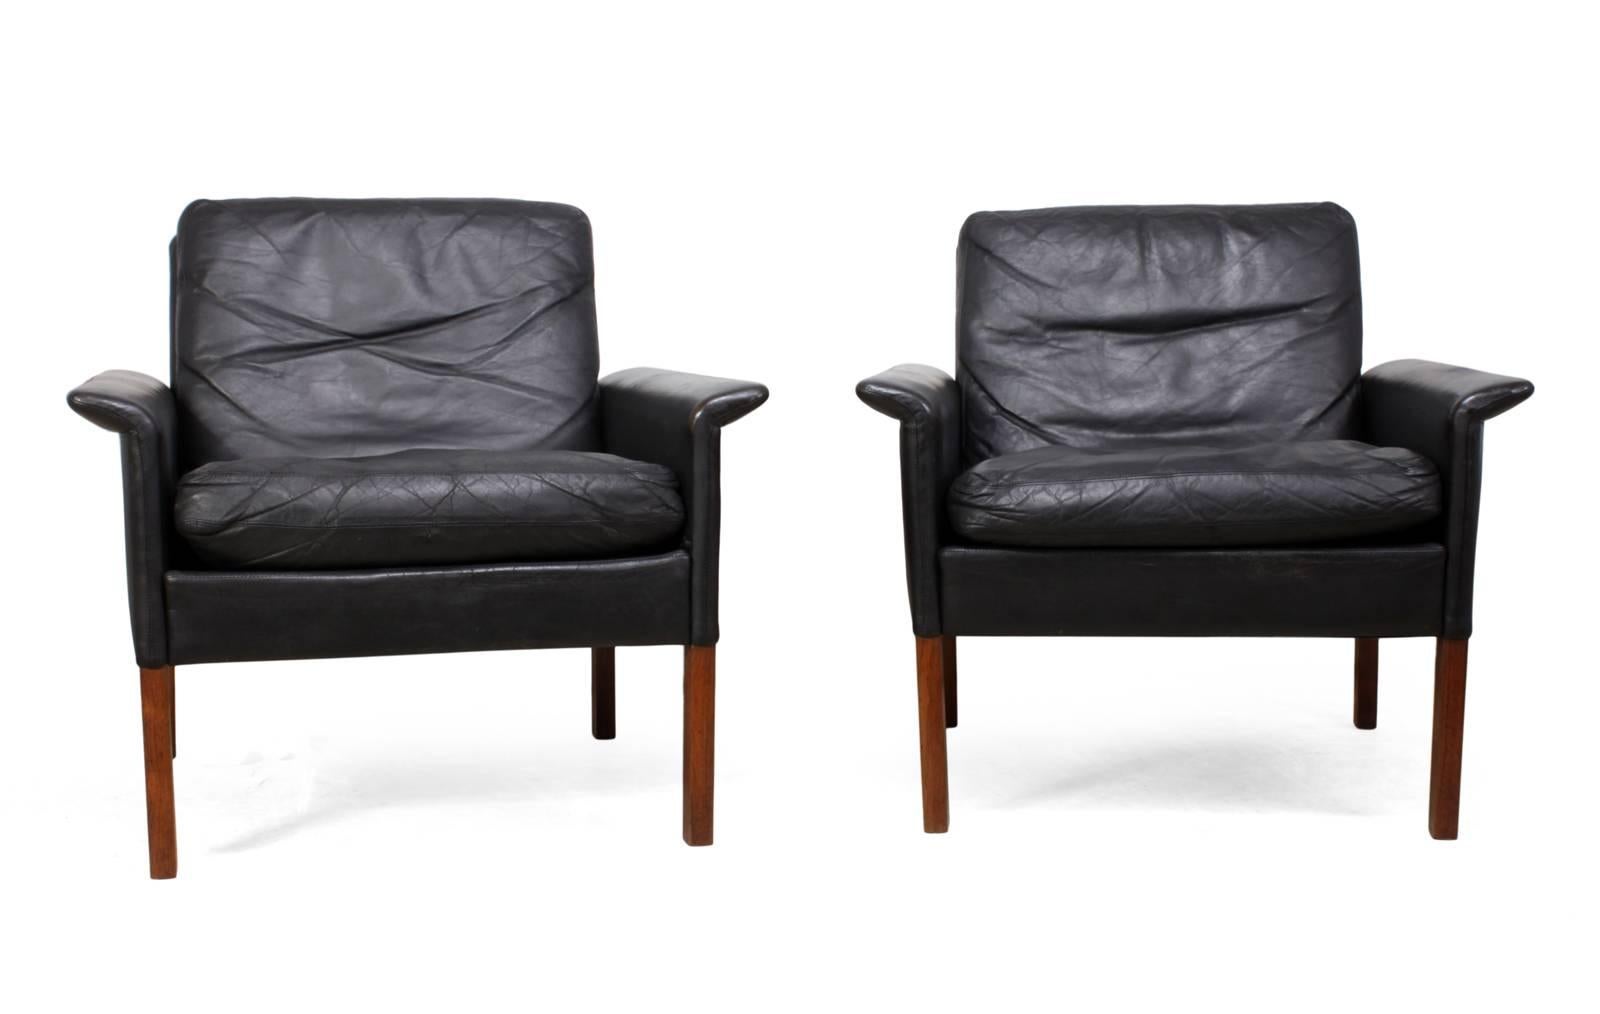 Midcentury Danish armchairs by Hans Olsen
This pair of Danish chairs were designed by Hans Olsen in the late 1950s, they have black leather upholstery with down filled cushions, the legs are solid rosewood and frames are solid beech, the leather